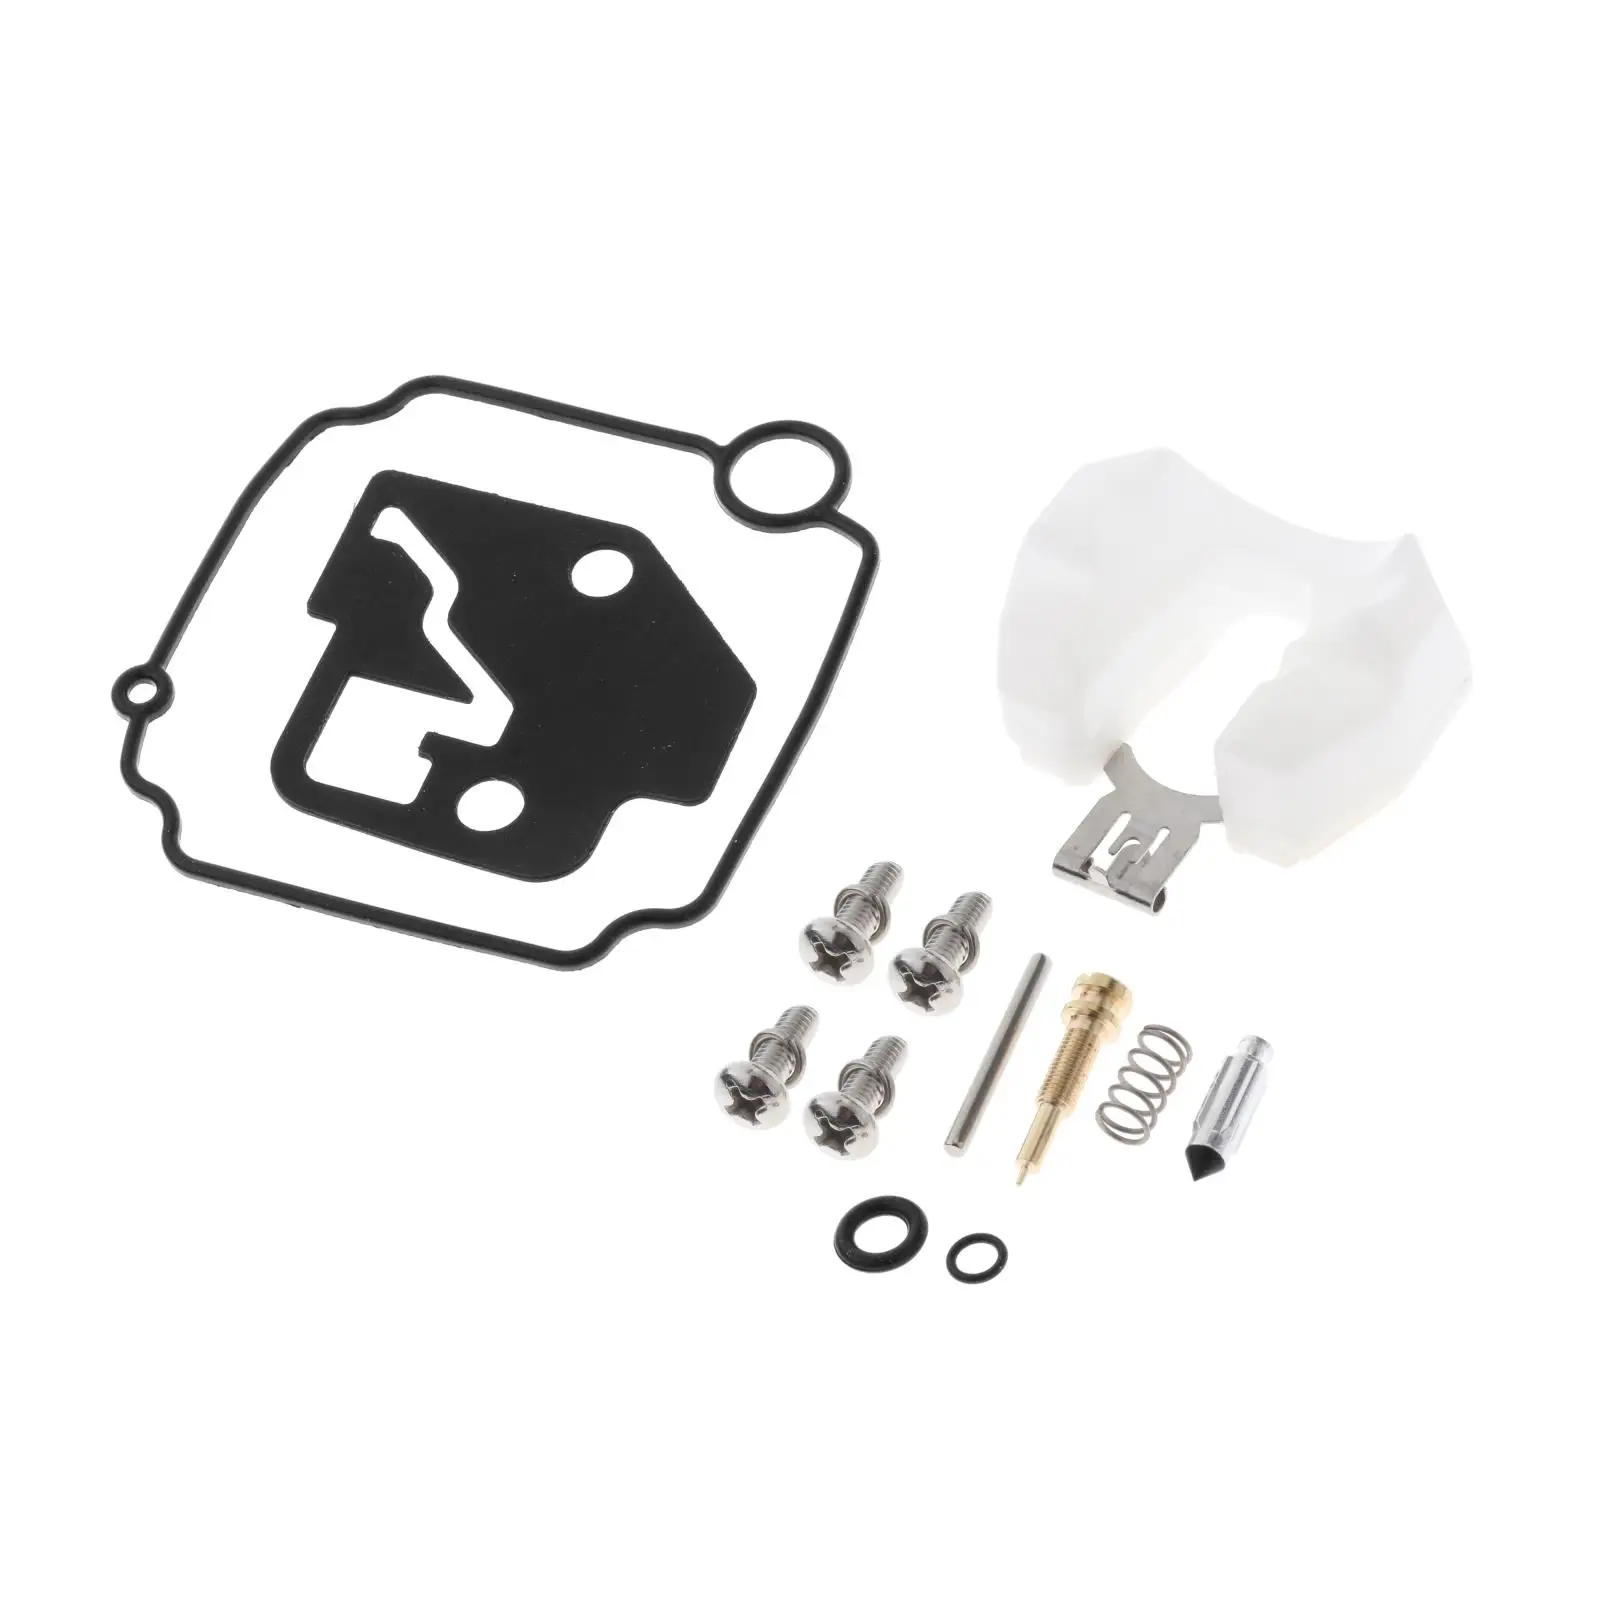 Carburetor Kit for Tohatsu Nissan Outboard 4-Stroke 8HP 9.8HP NSF8A3 MFS8A2